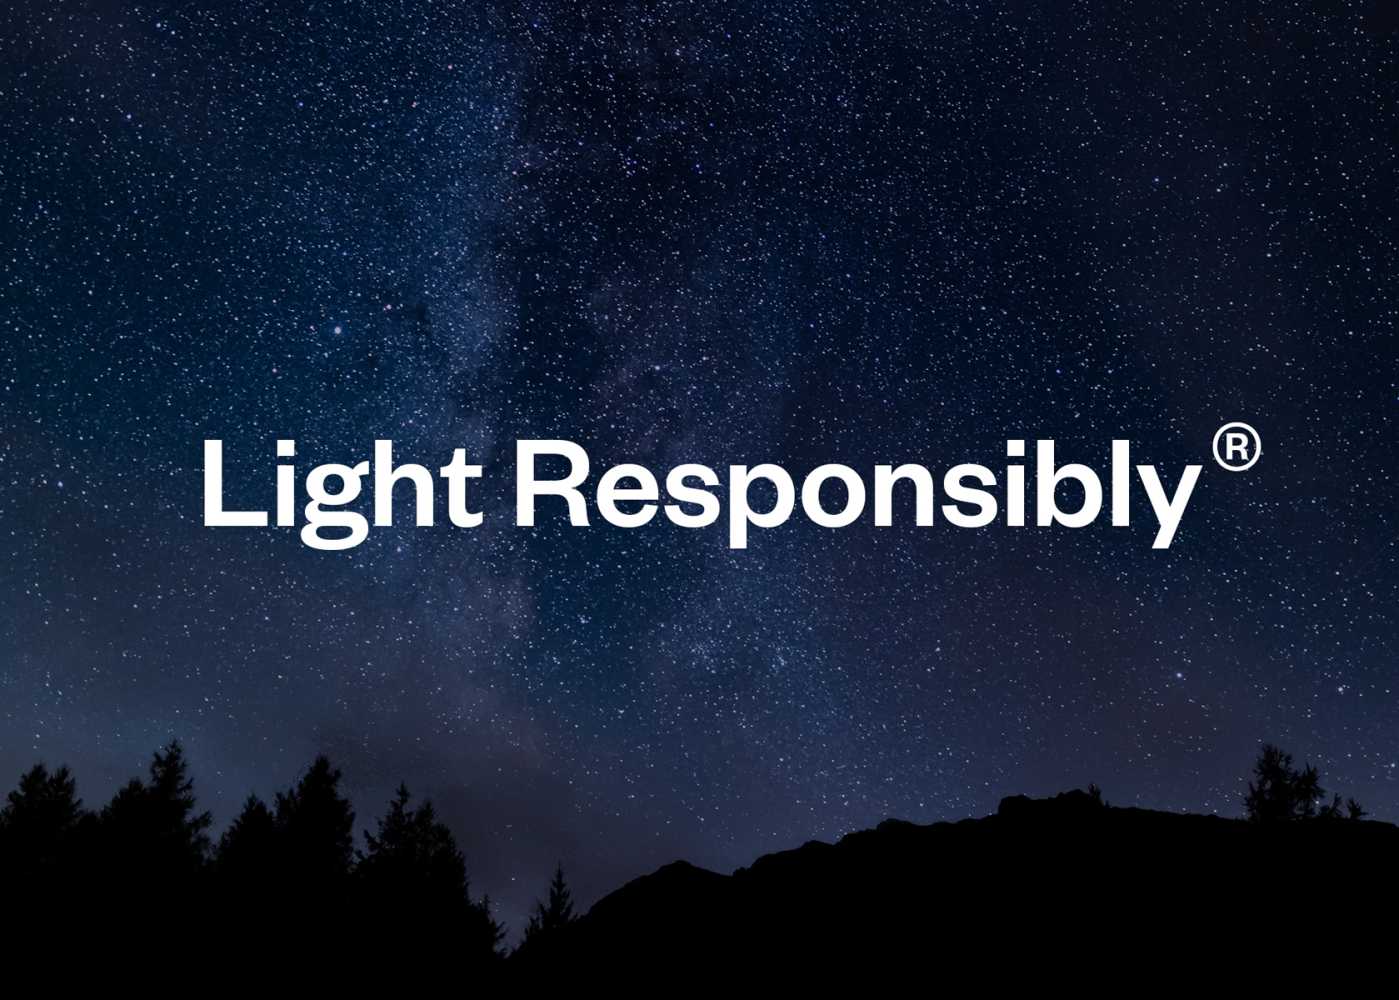 The initiative aims to support and promote responsible lighting practices